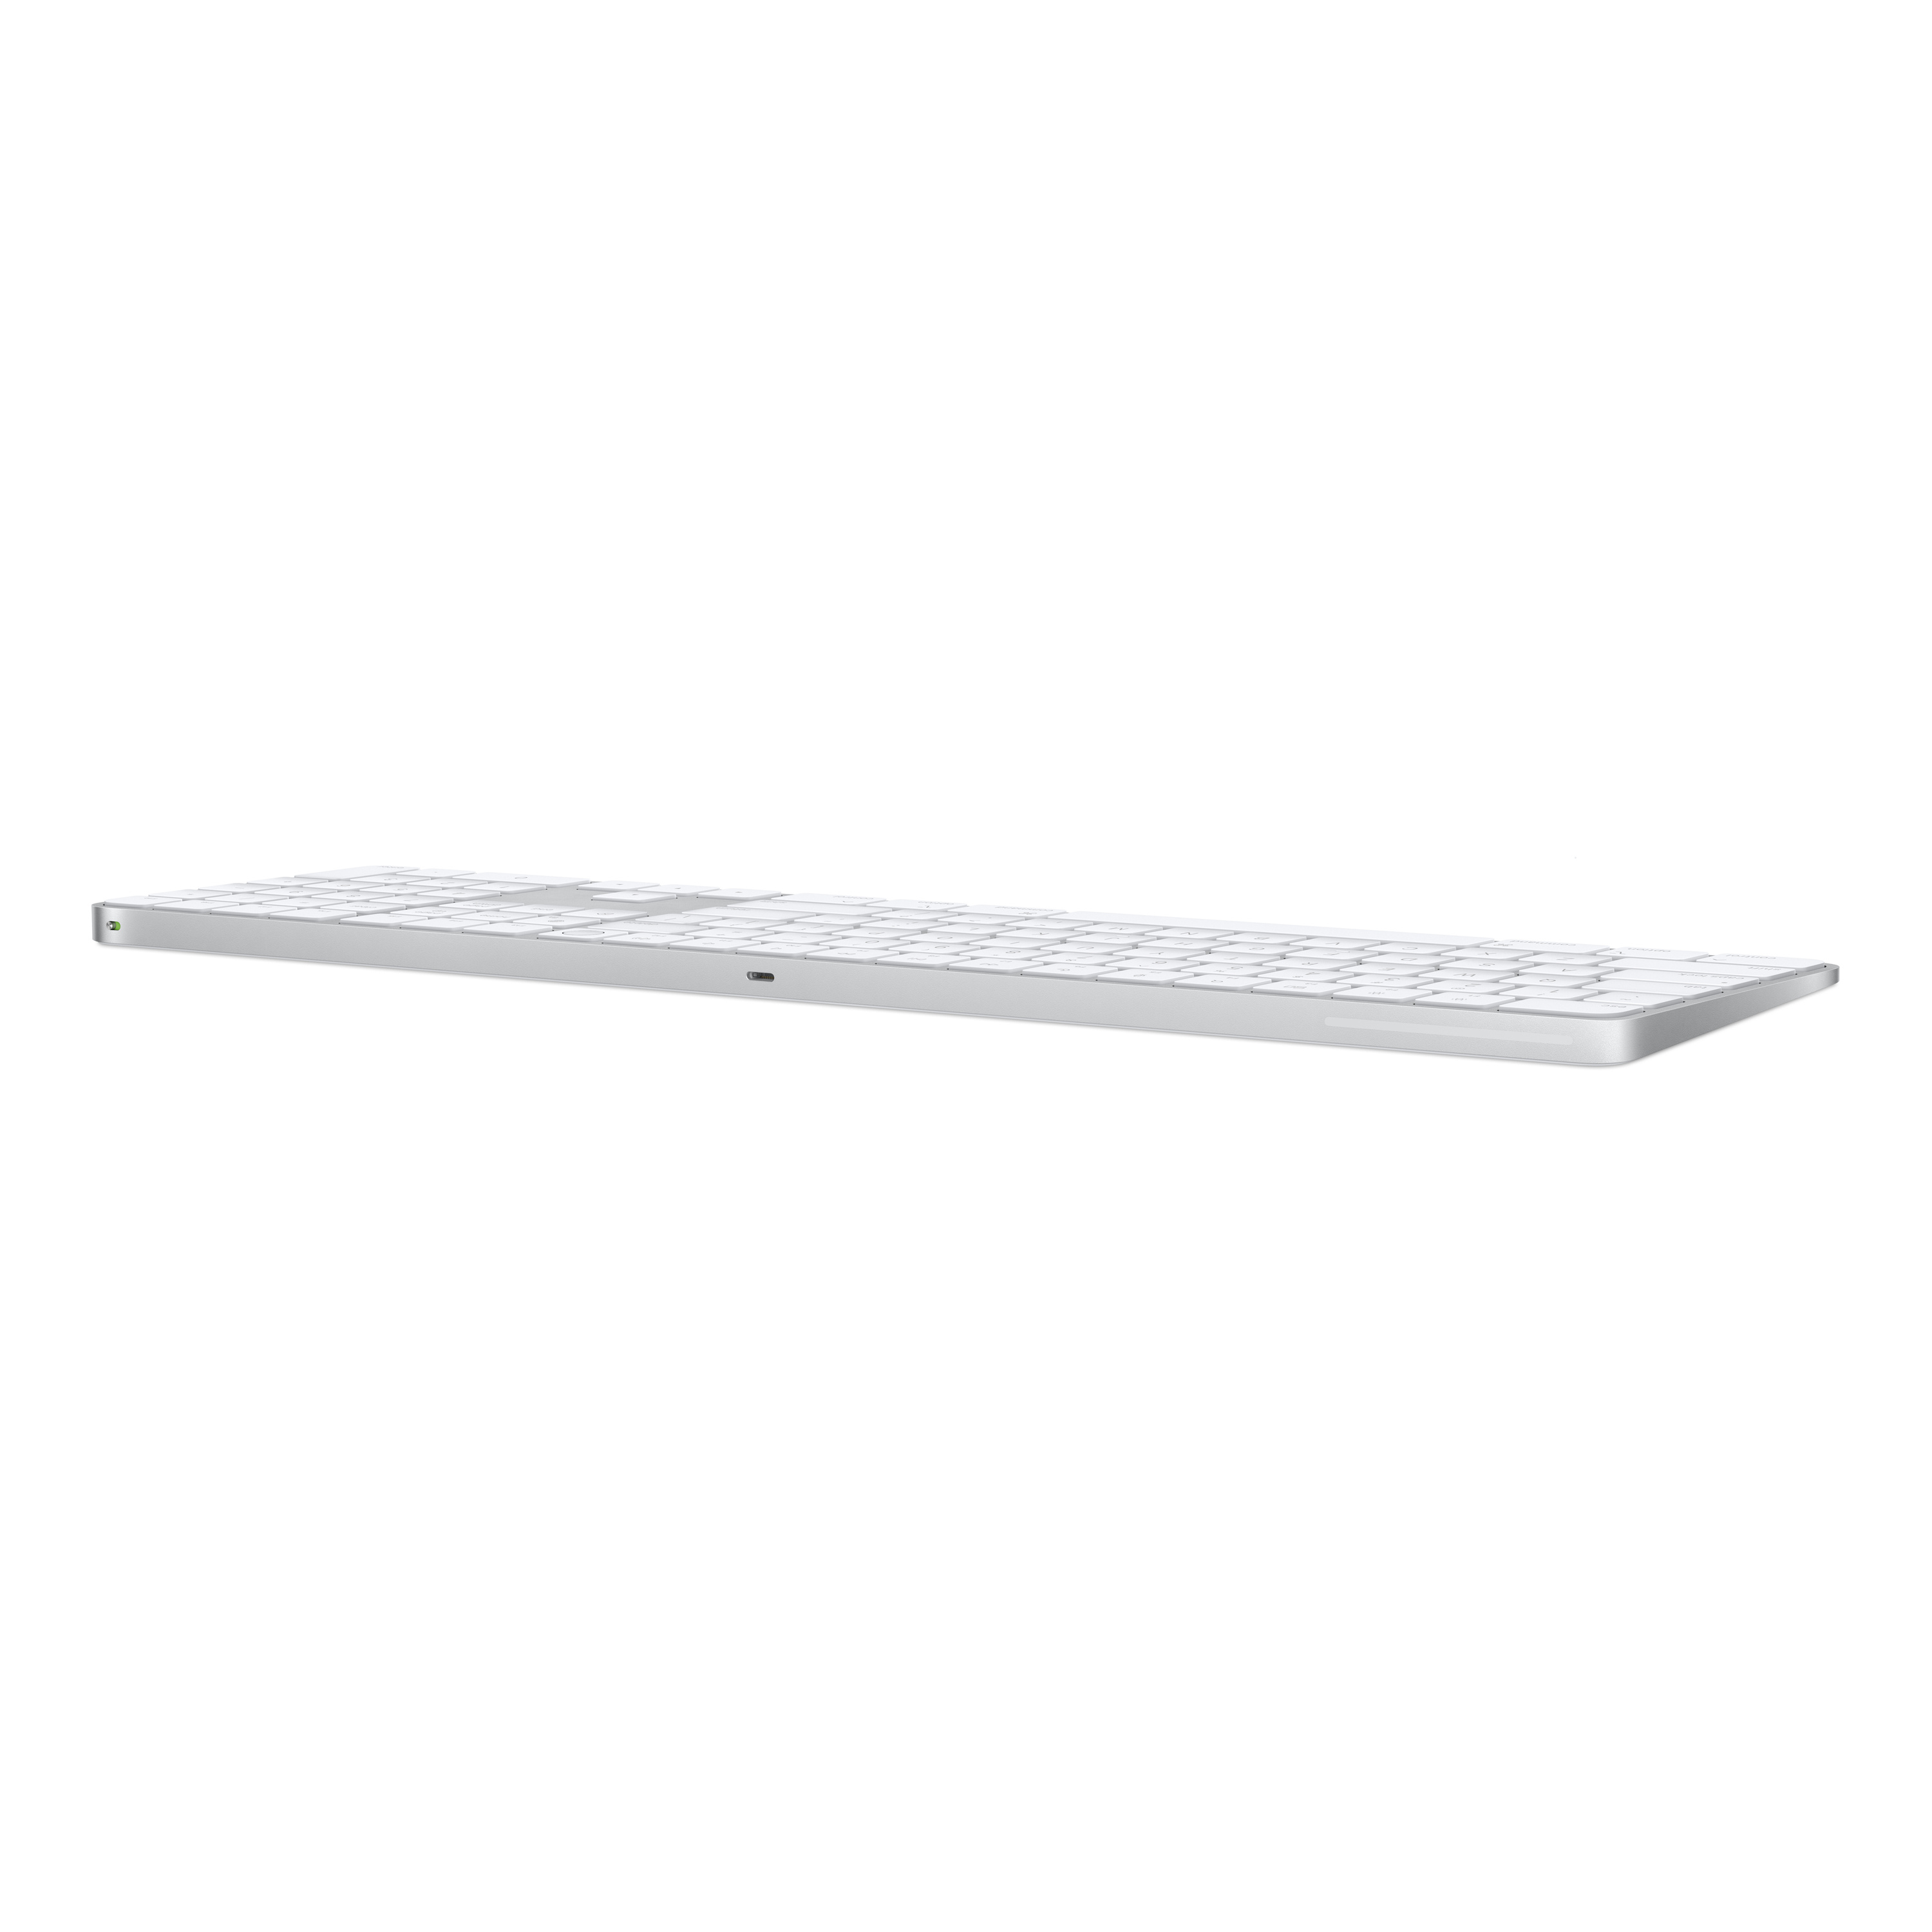 Apple Magic Keyboard with Touch ID and Numeric Keypad - Tastatur - Bluetooth, USB-C - QWERTY - Russisch - für iMac (Anfang 2021)